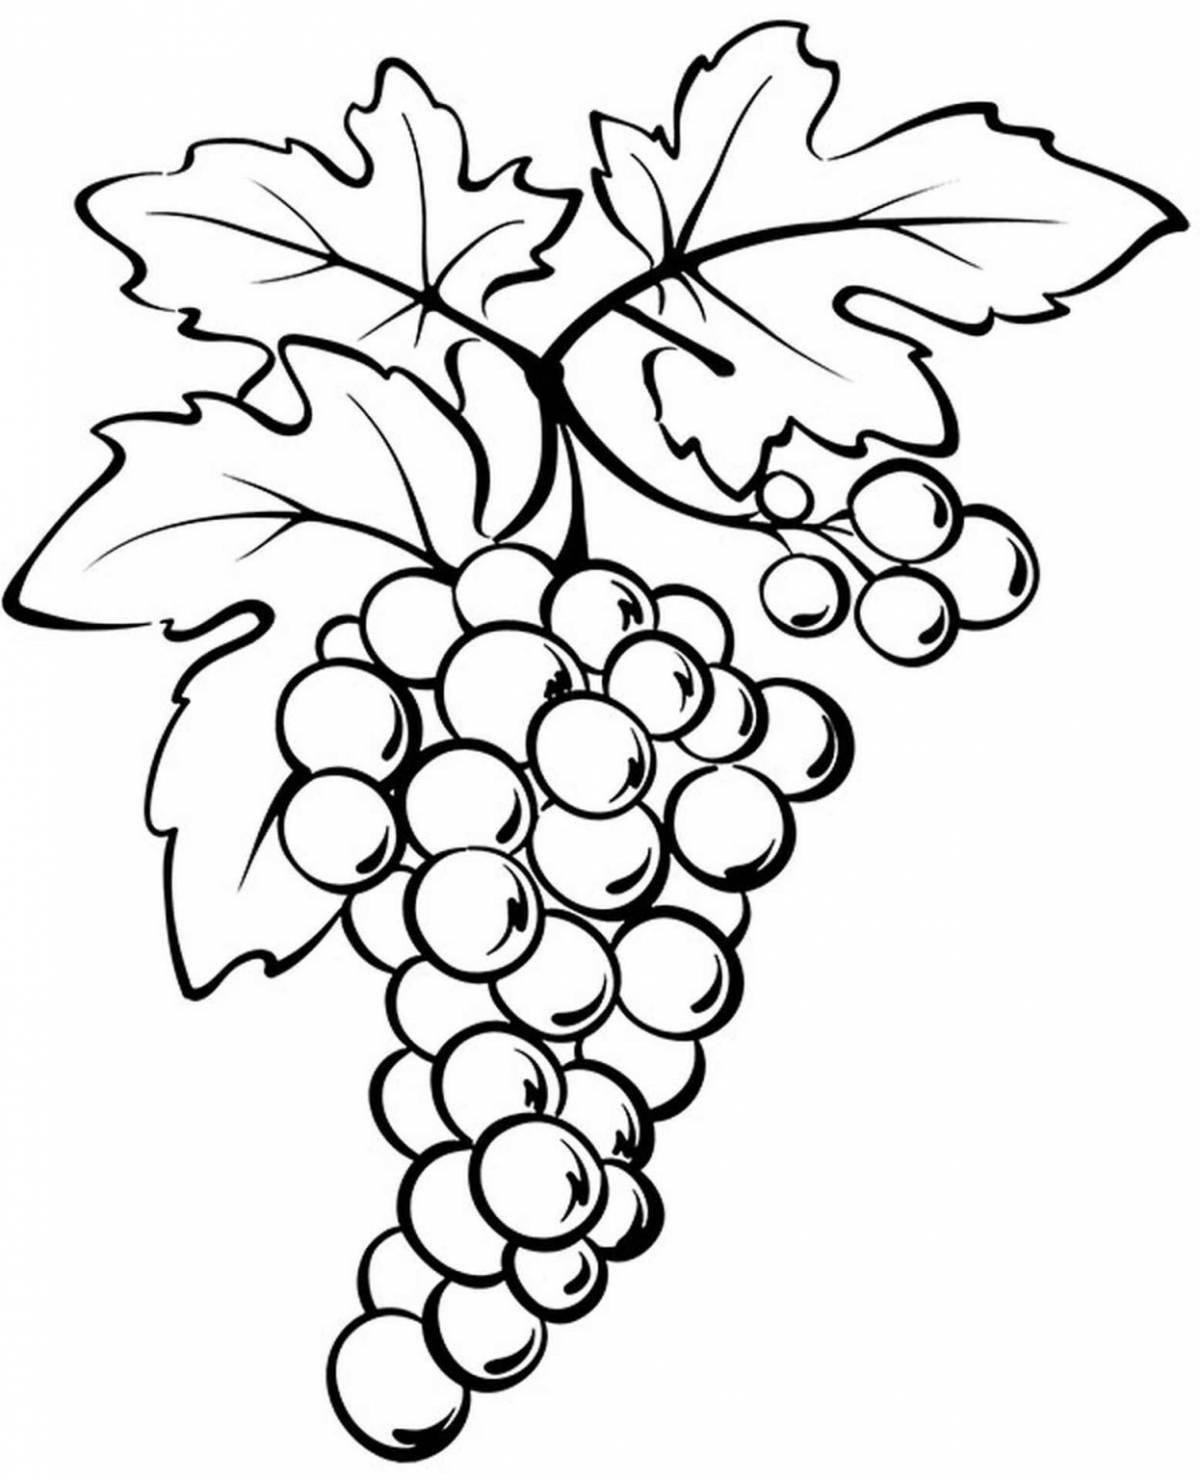 Fun coloring grapes for children 3-4 years old